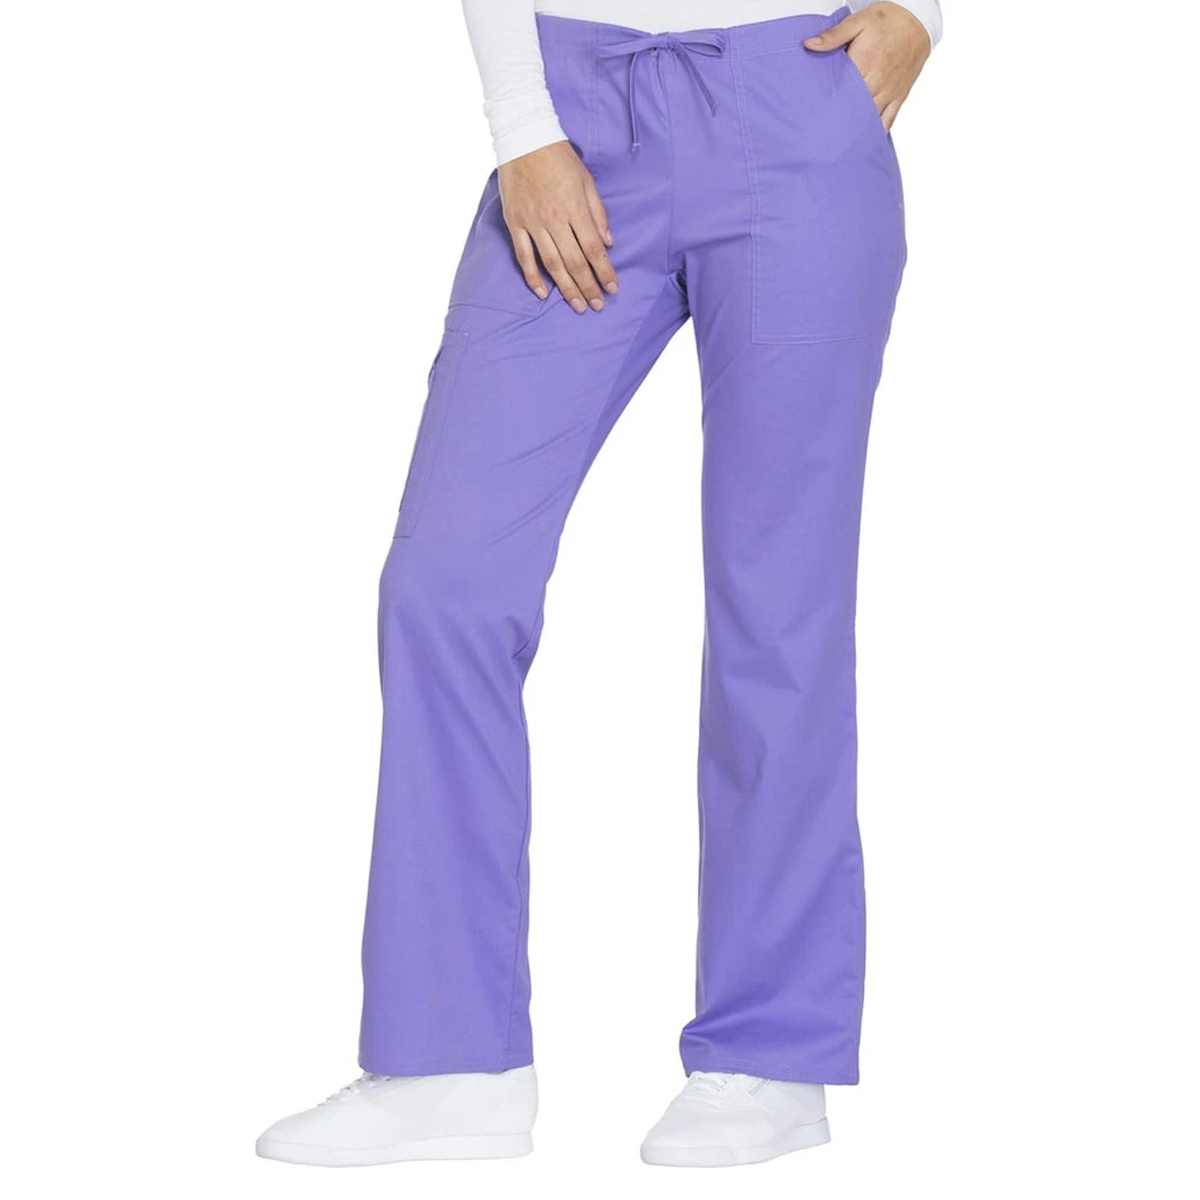 https://www.2heartsmedical.com/wp-content/uploads/2021/09/Core-Stretch-by-Cherokee-Workwear-Womens-Drawstring-Scrub-Pant-CH4044-2.jpg